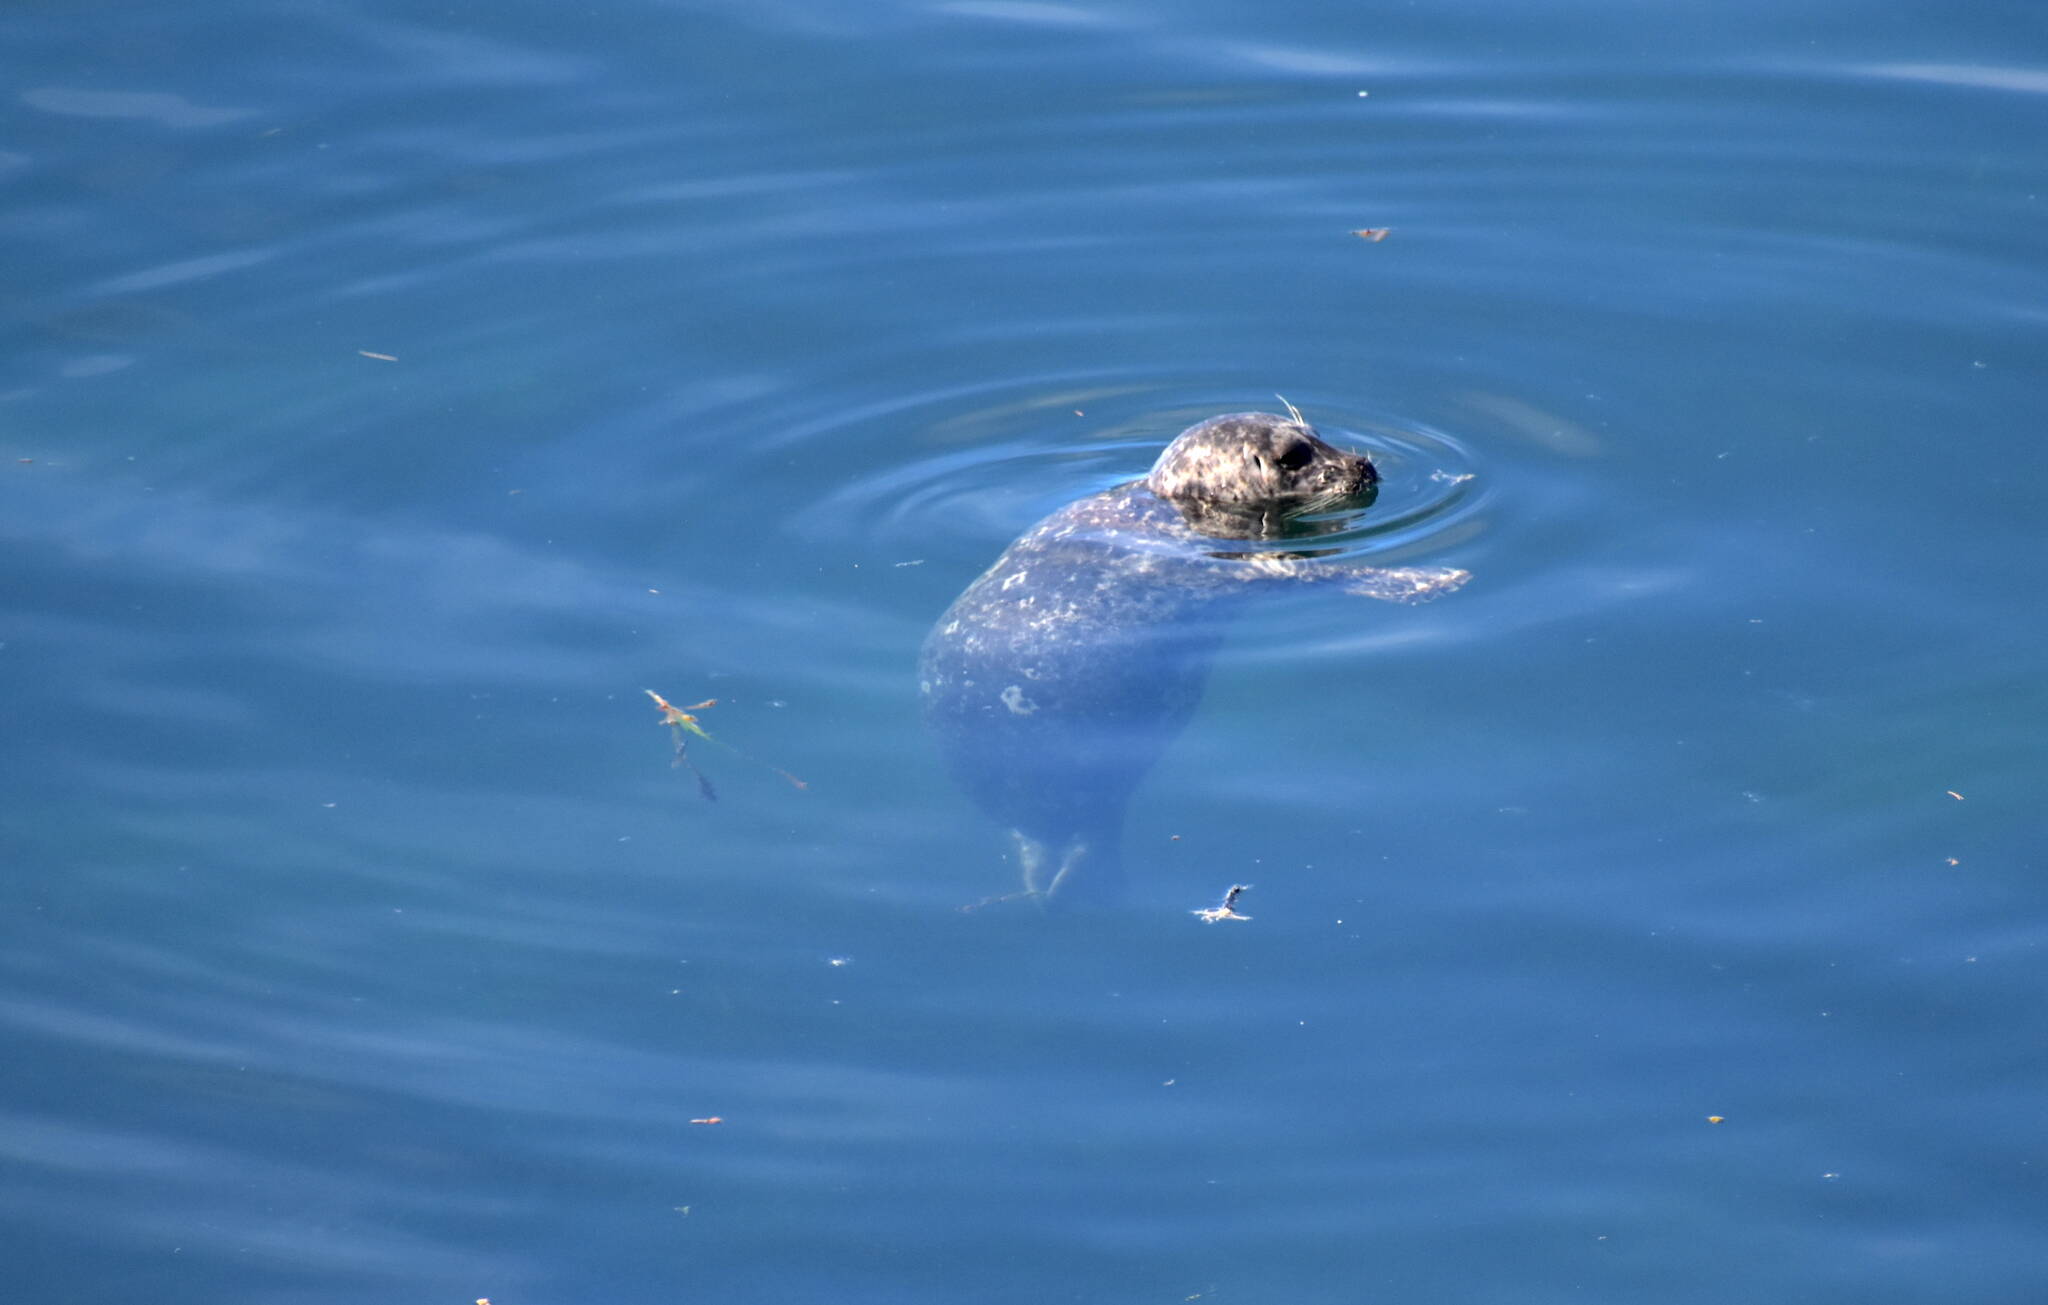 Kelley Balcomb-Bartok / Staff photo
A harbor seal floats lethargically in the shallow waters near the site of the vessel sinking surrounded by a sheen of diesel fuel.